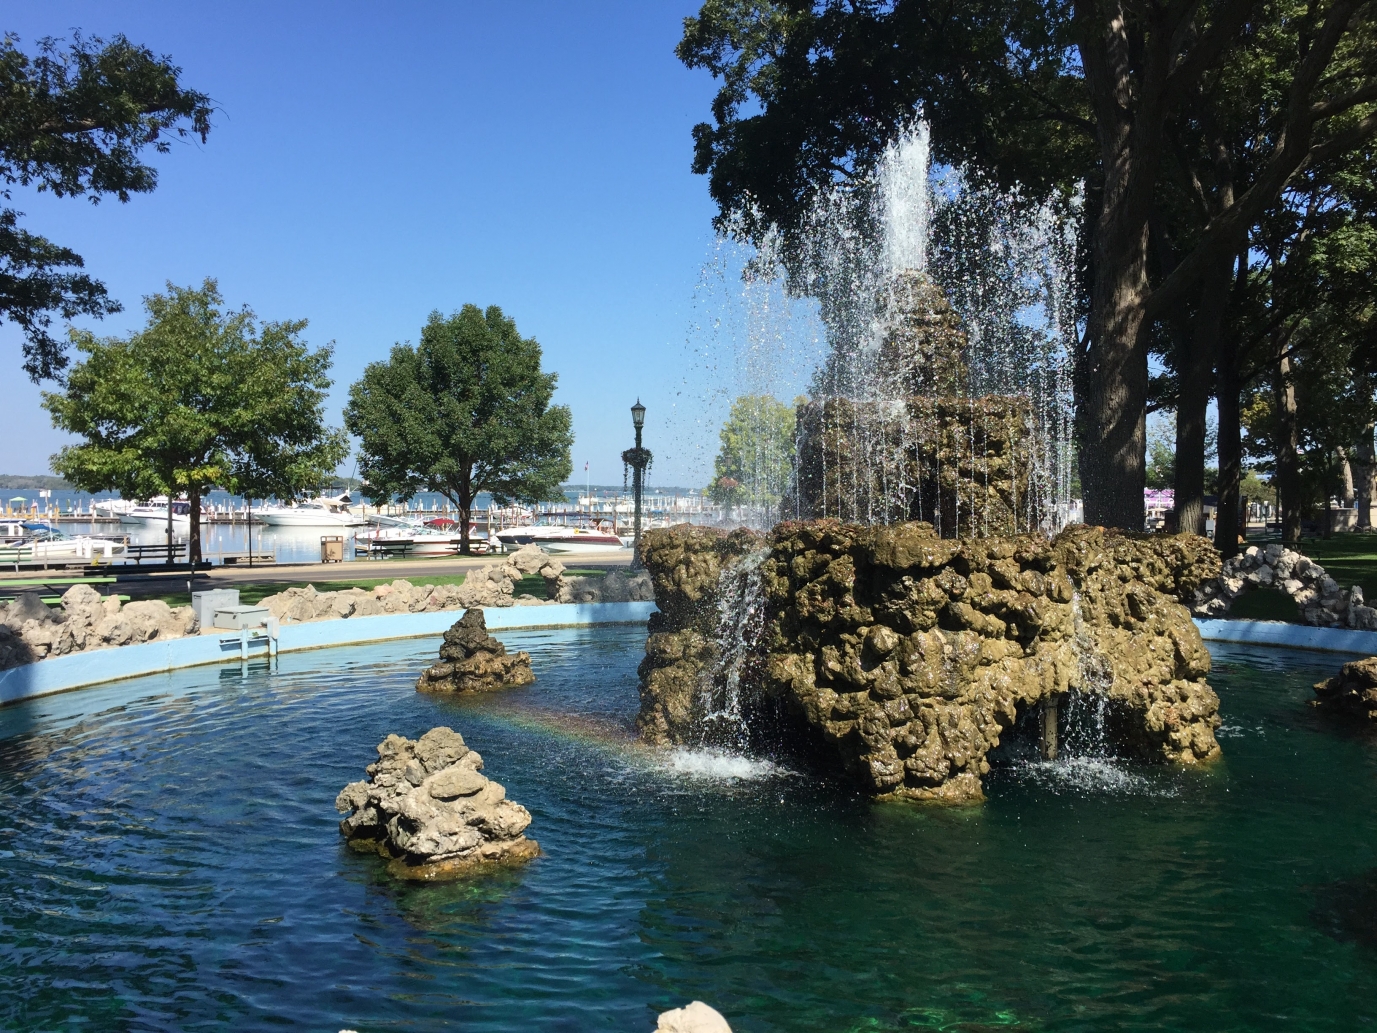 The fountain at DeRivera Park on Put-in-Bay.